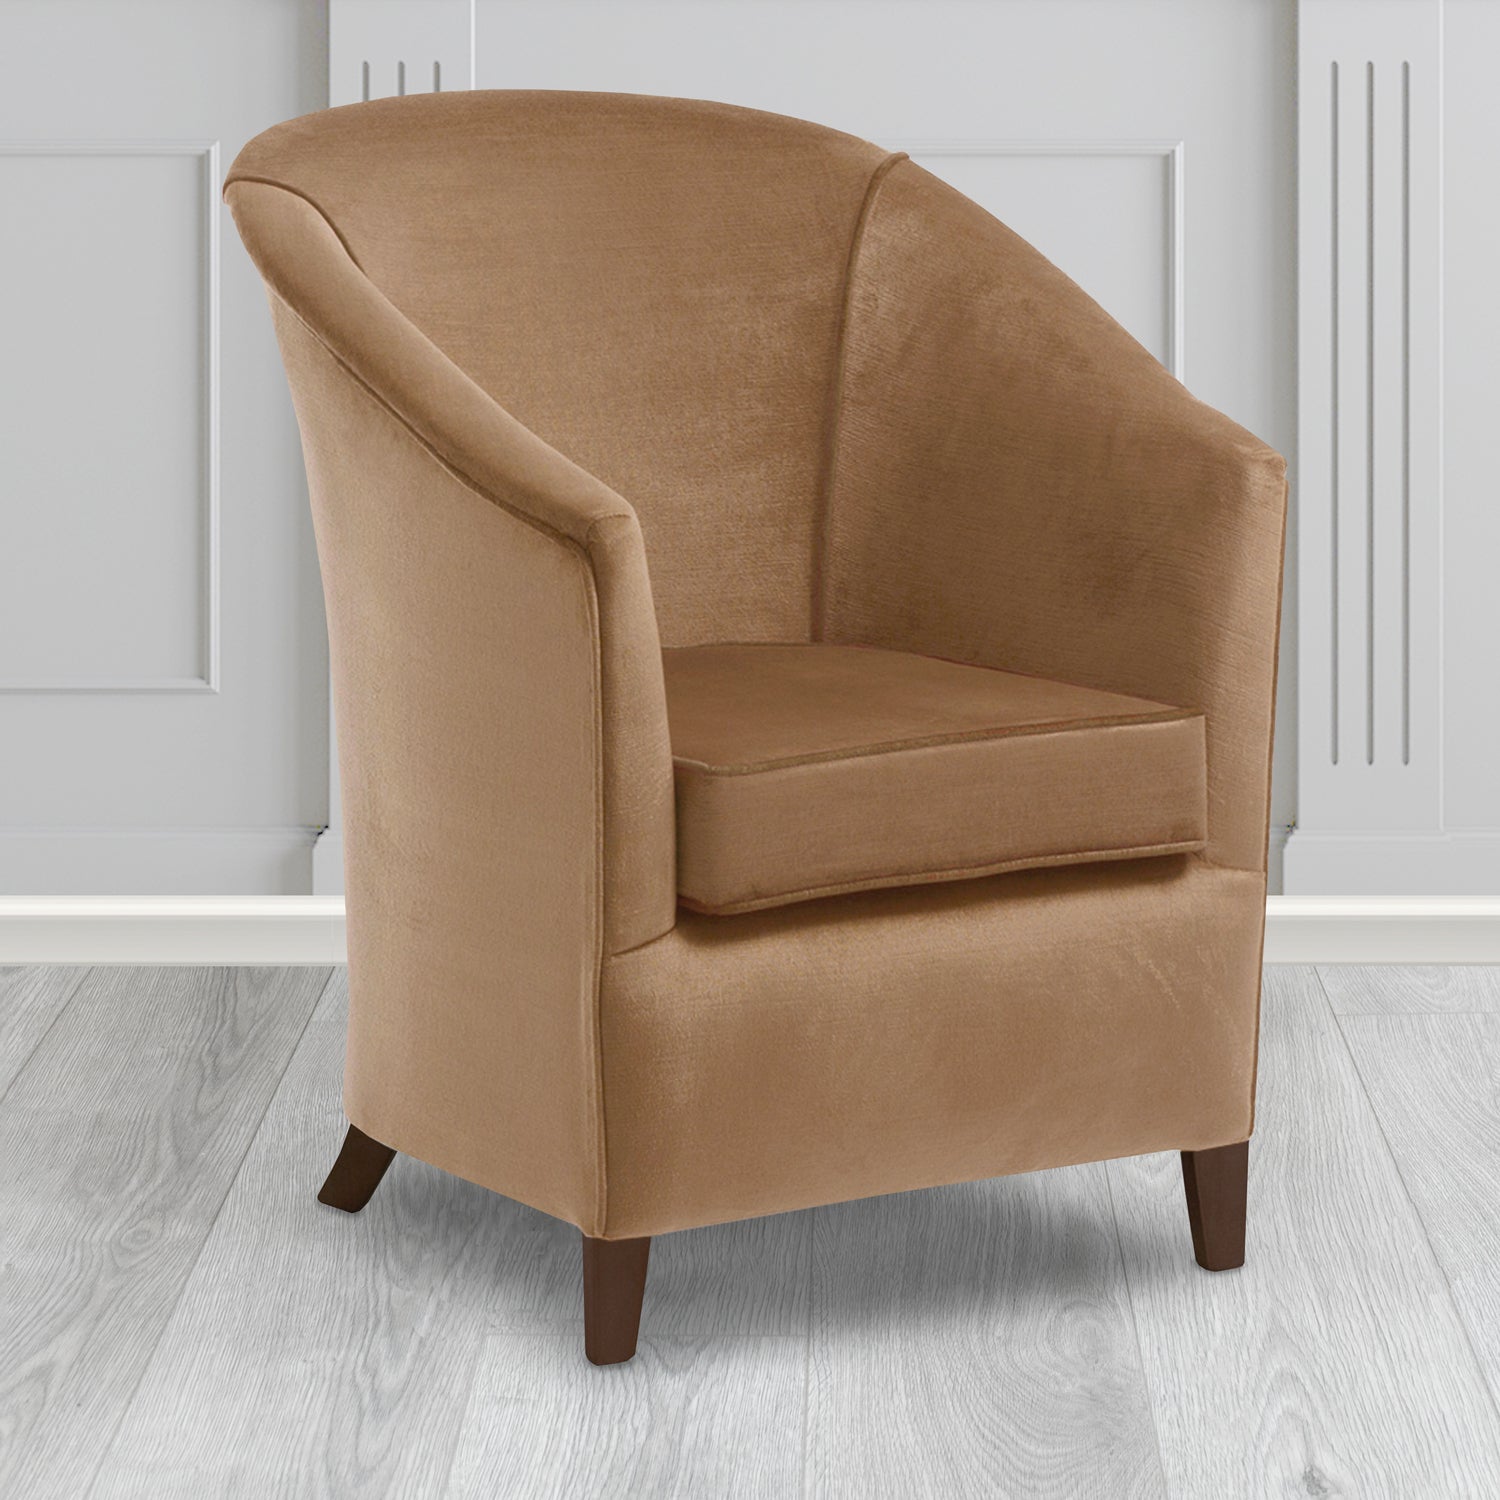 Bolton Tub Chair in Noble 806 Camel Crib 5 Velvet Fabric - Water Resistant - The Tub Chair Shop